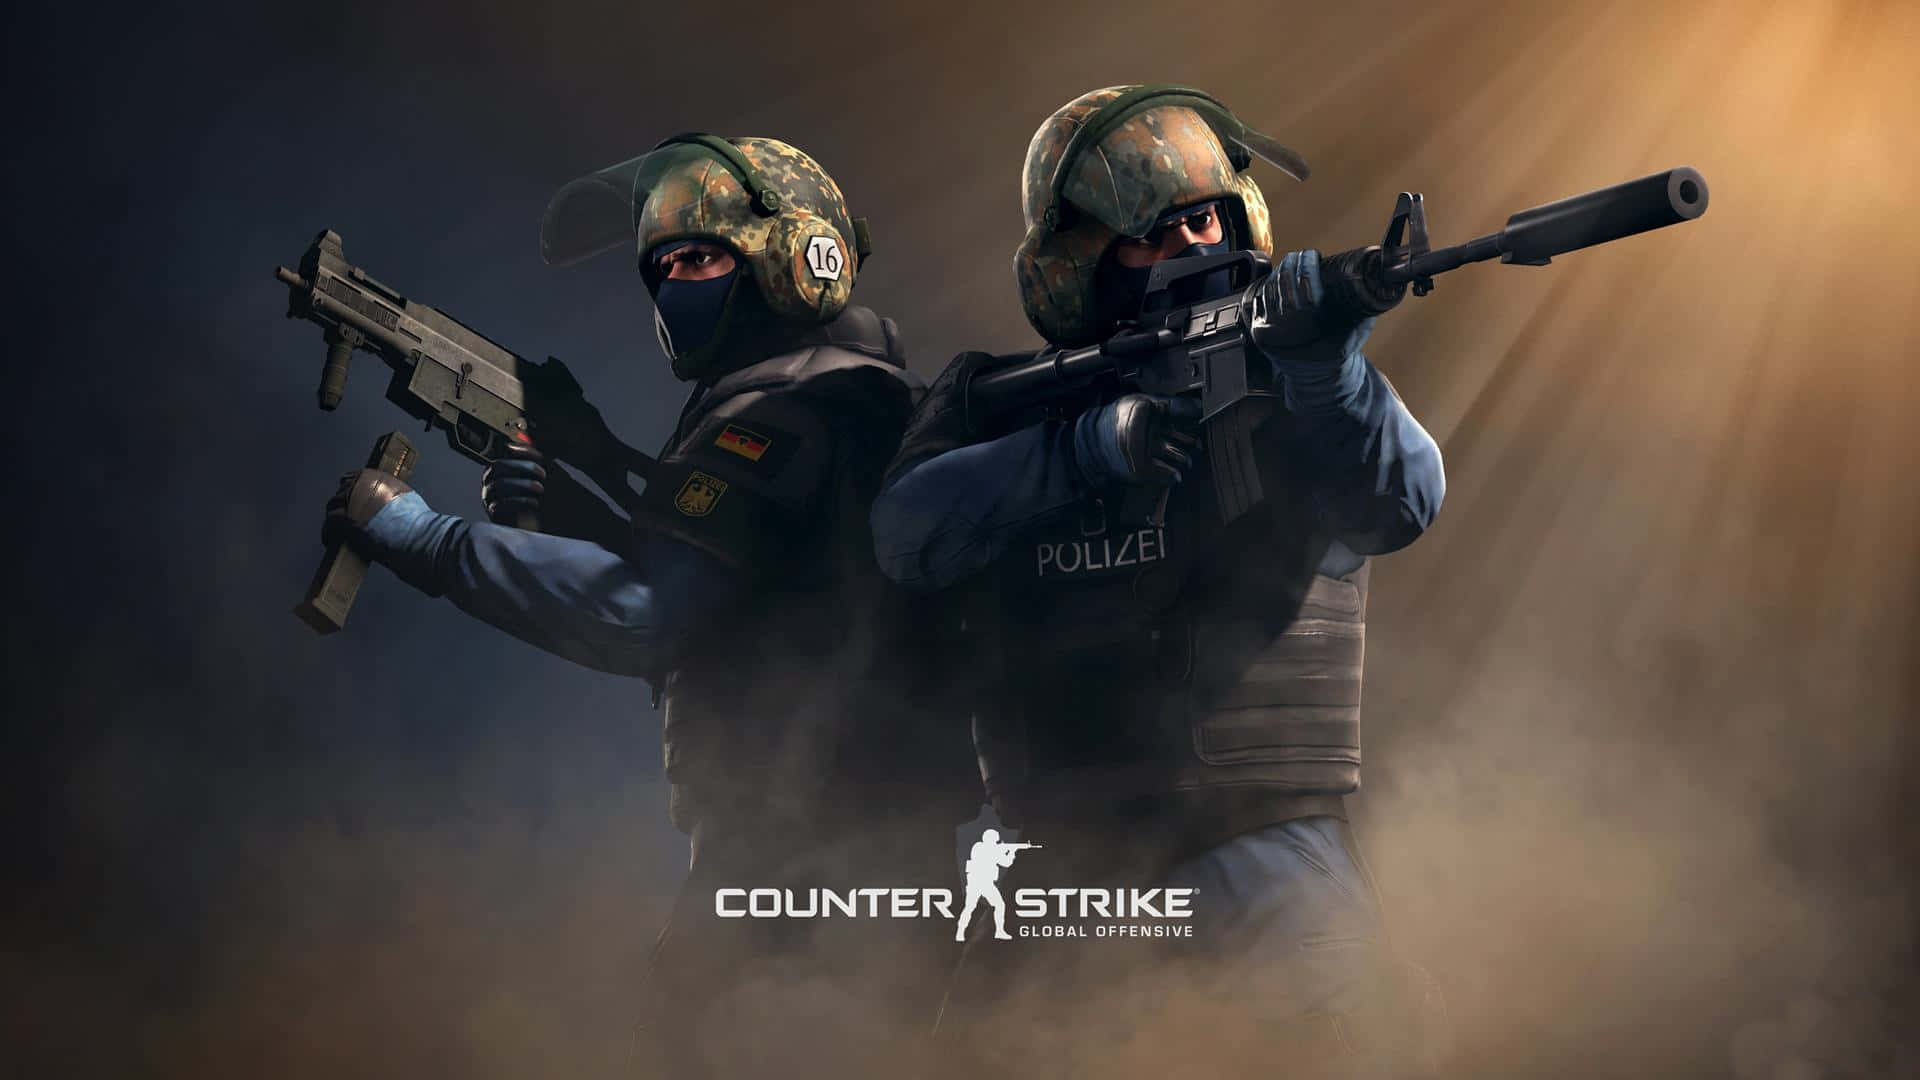 Counter-Strike: Global Offensive shines on the worlds largest stages